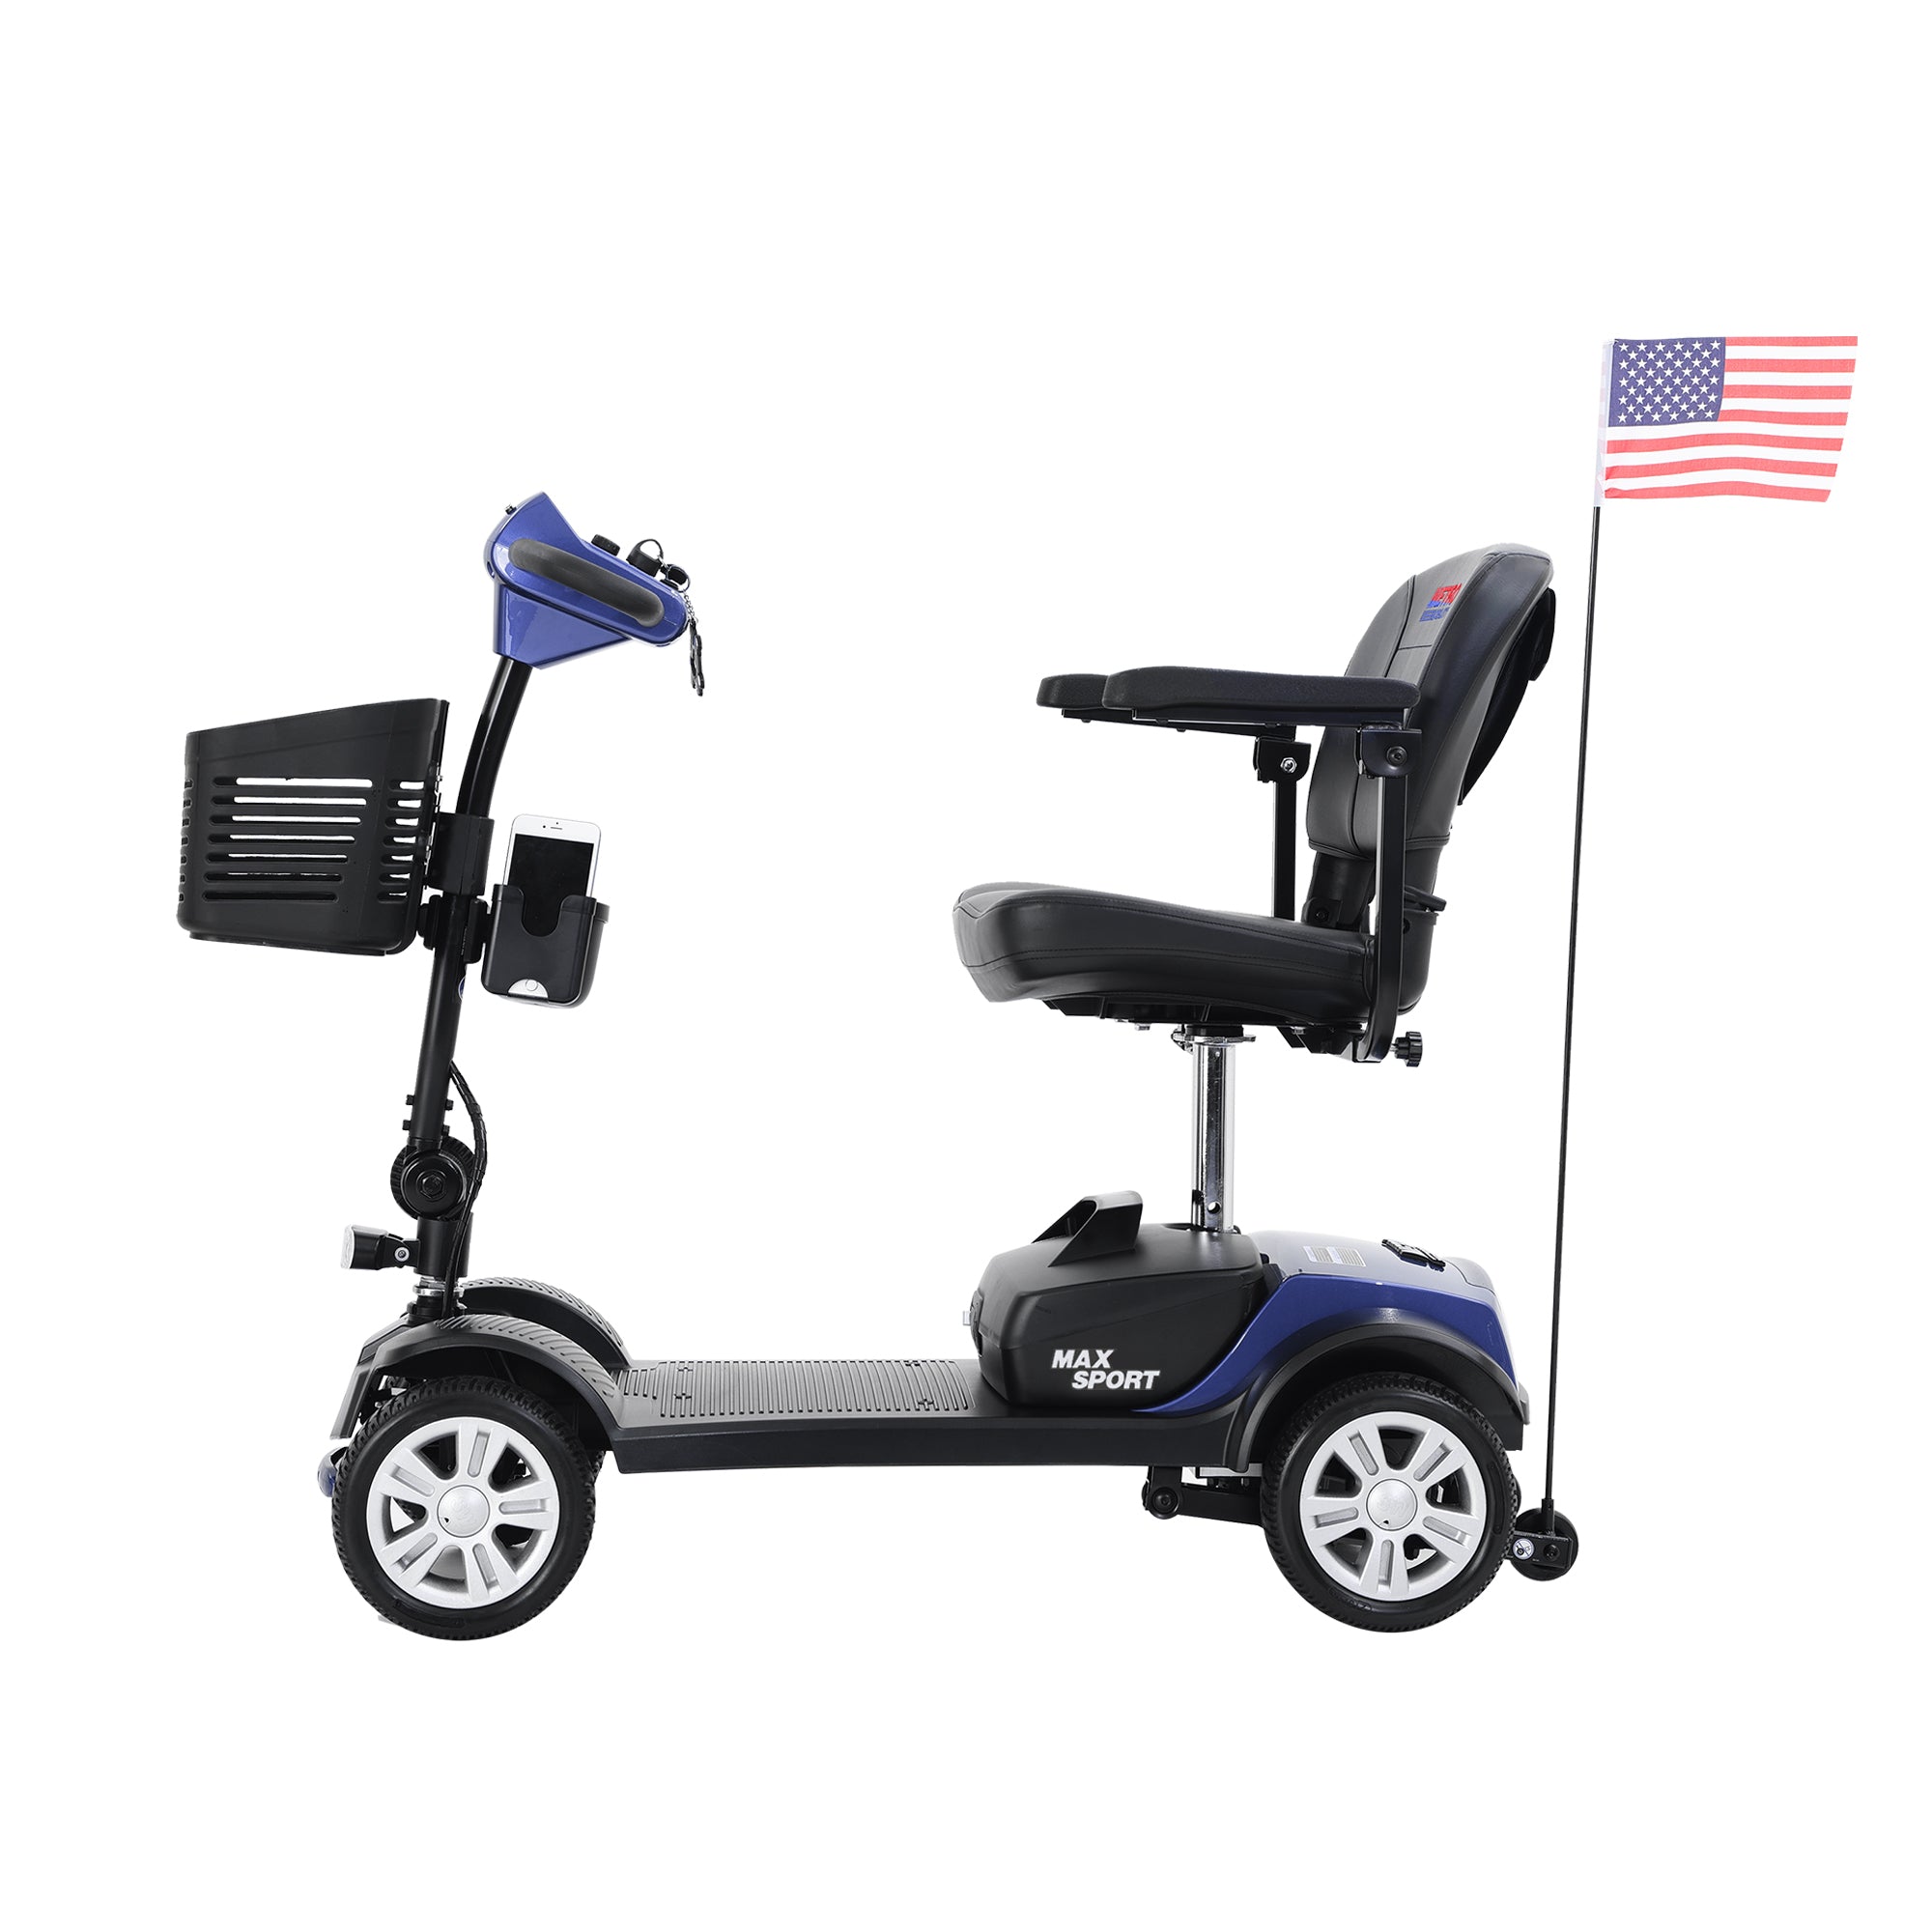 Carevas SPORT BLUE 4 Wheels Outdoor Compact Mobility Scooter with 2 in 1 Cup & Phone Holder